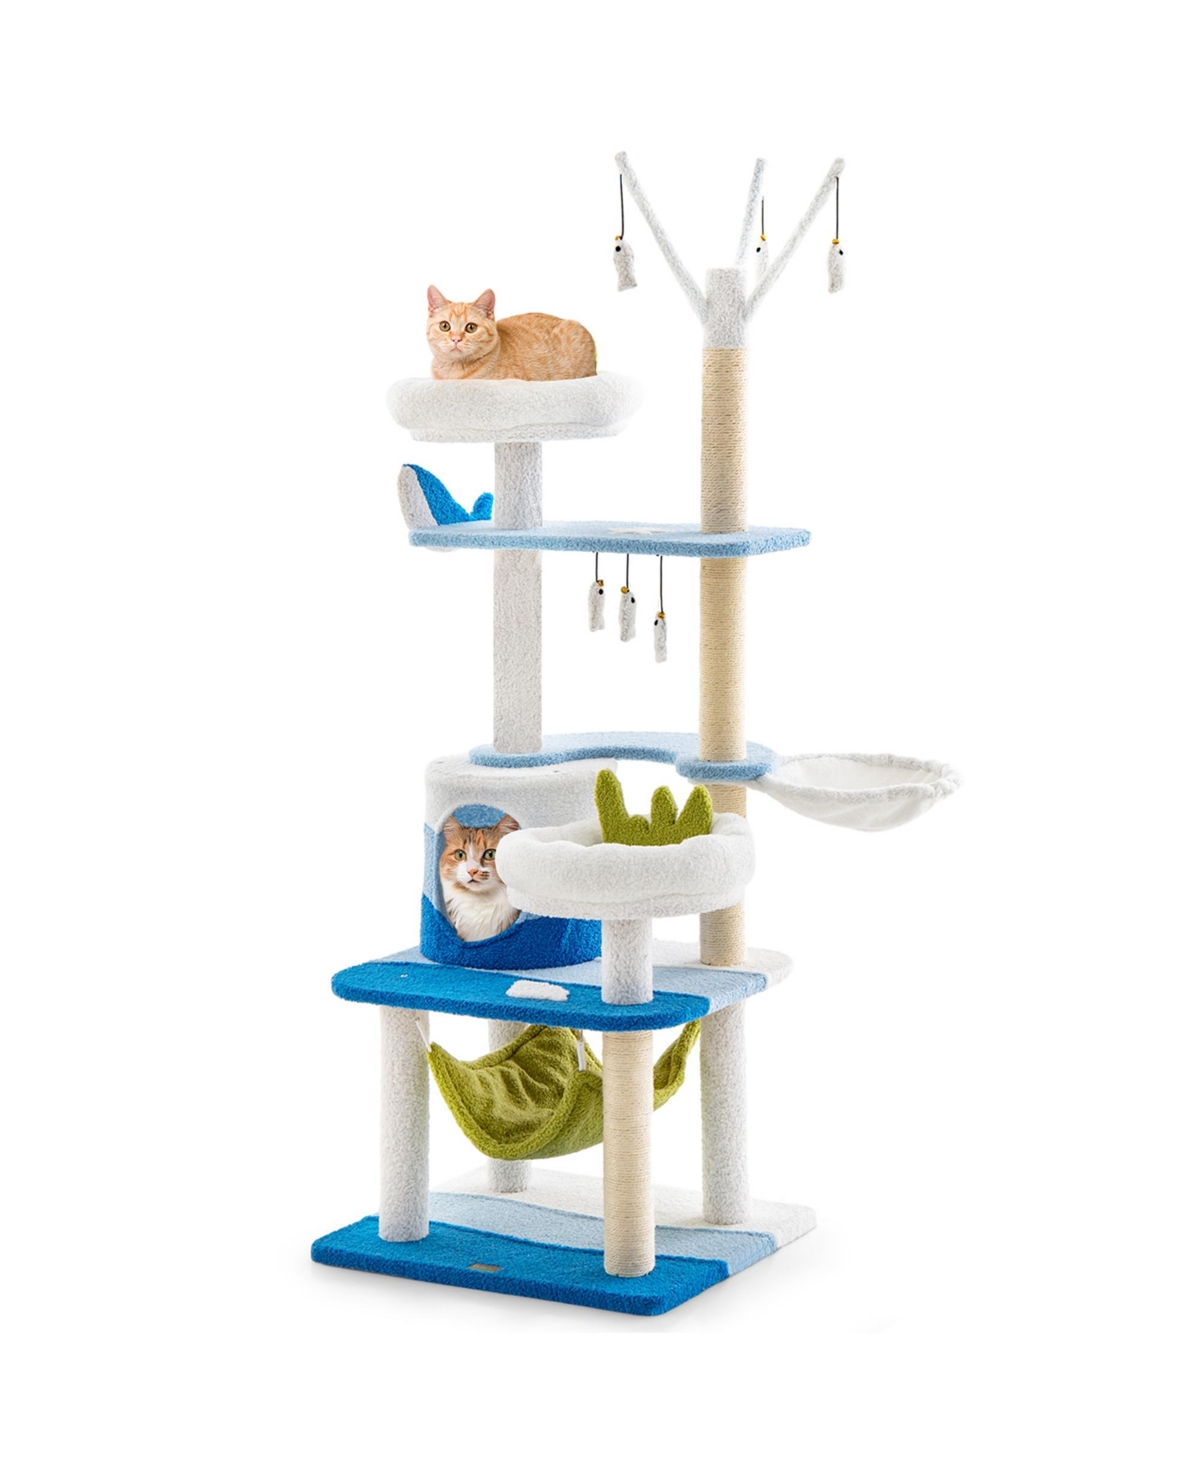 Ocean-themed Cat Tree with Sisal Covered Scratching Posts Condo Perch Indoor Tower - Blue